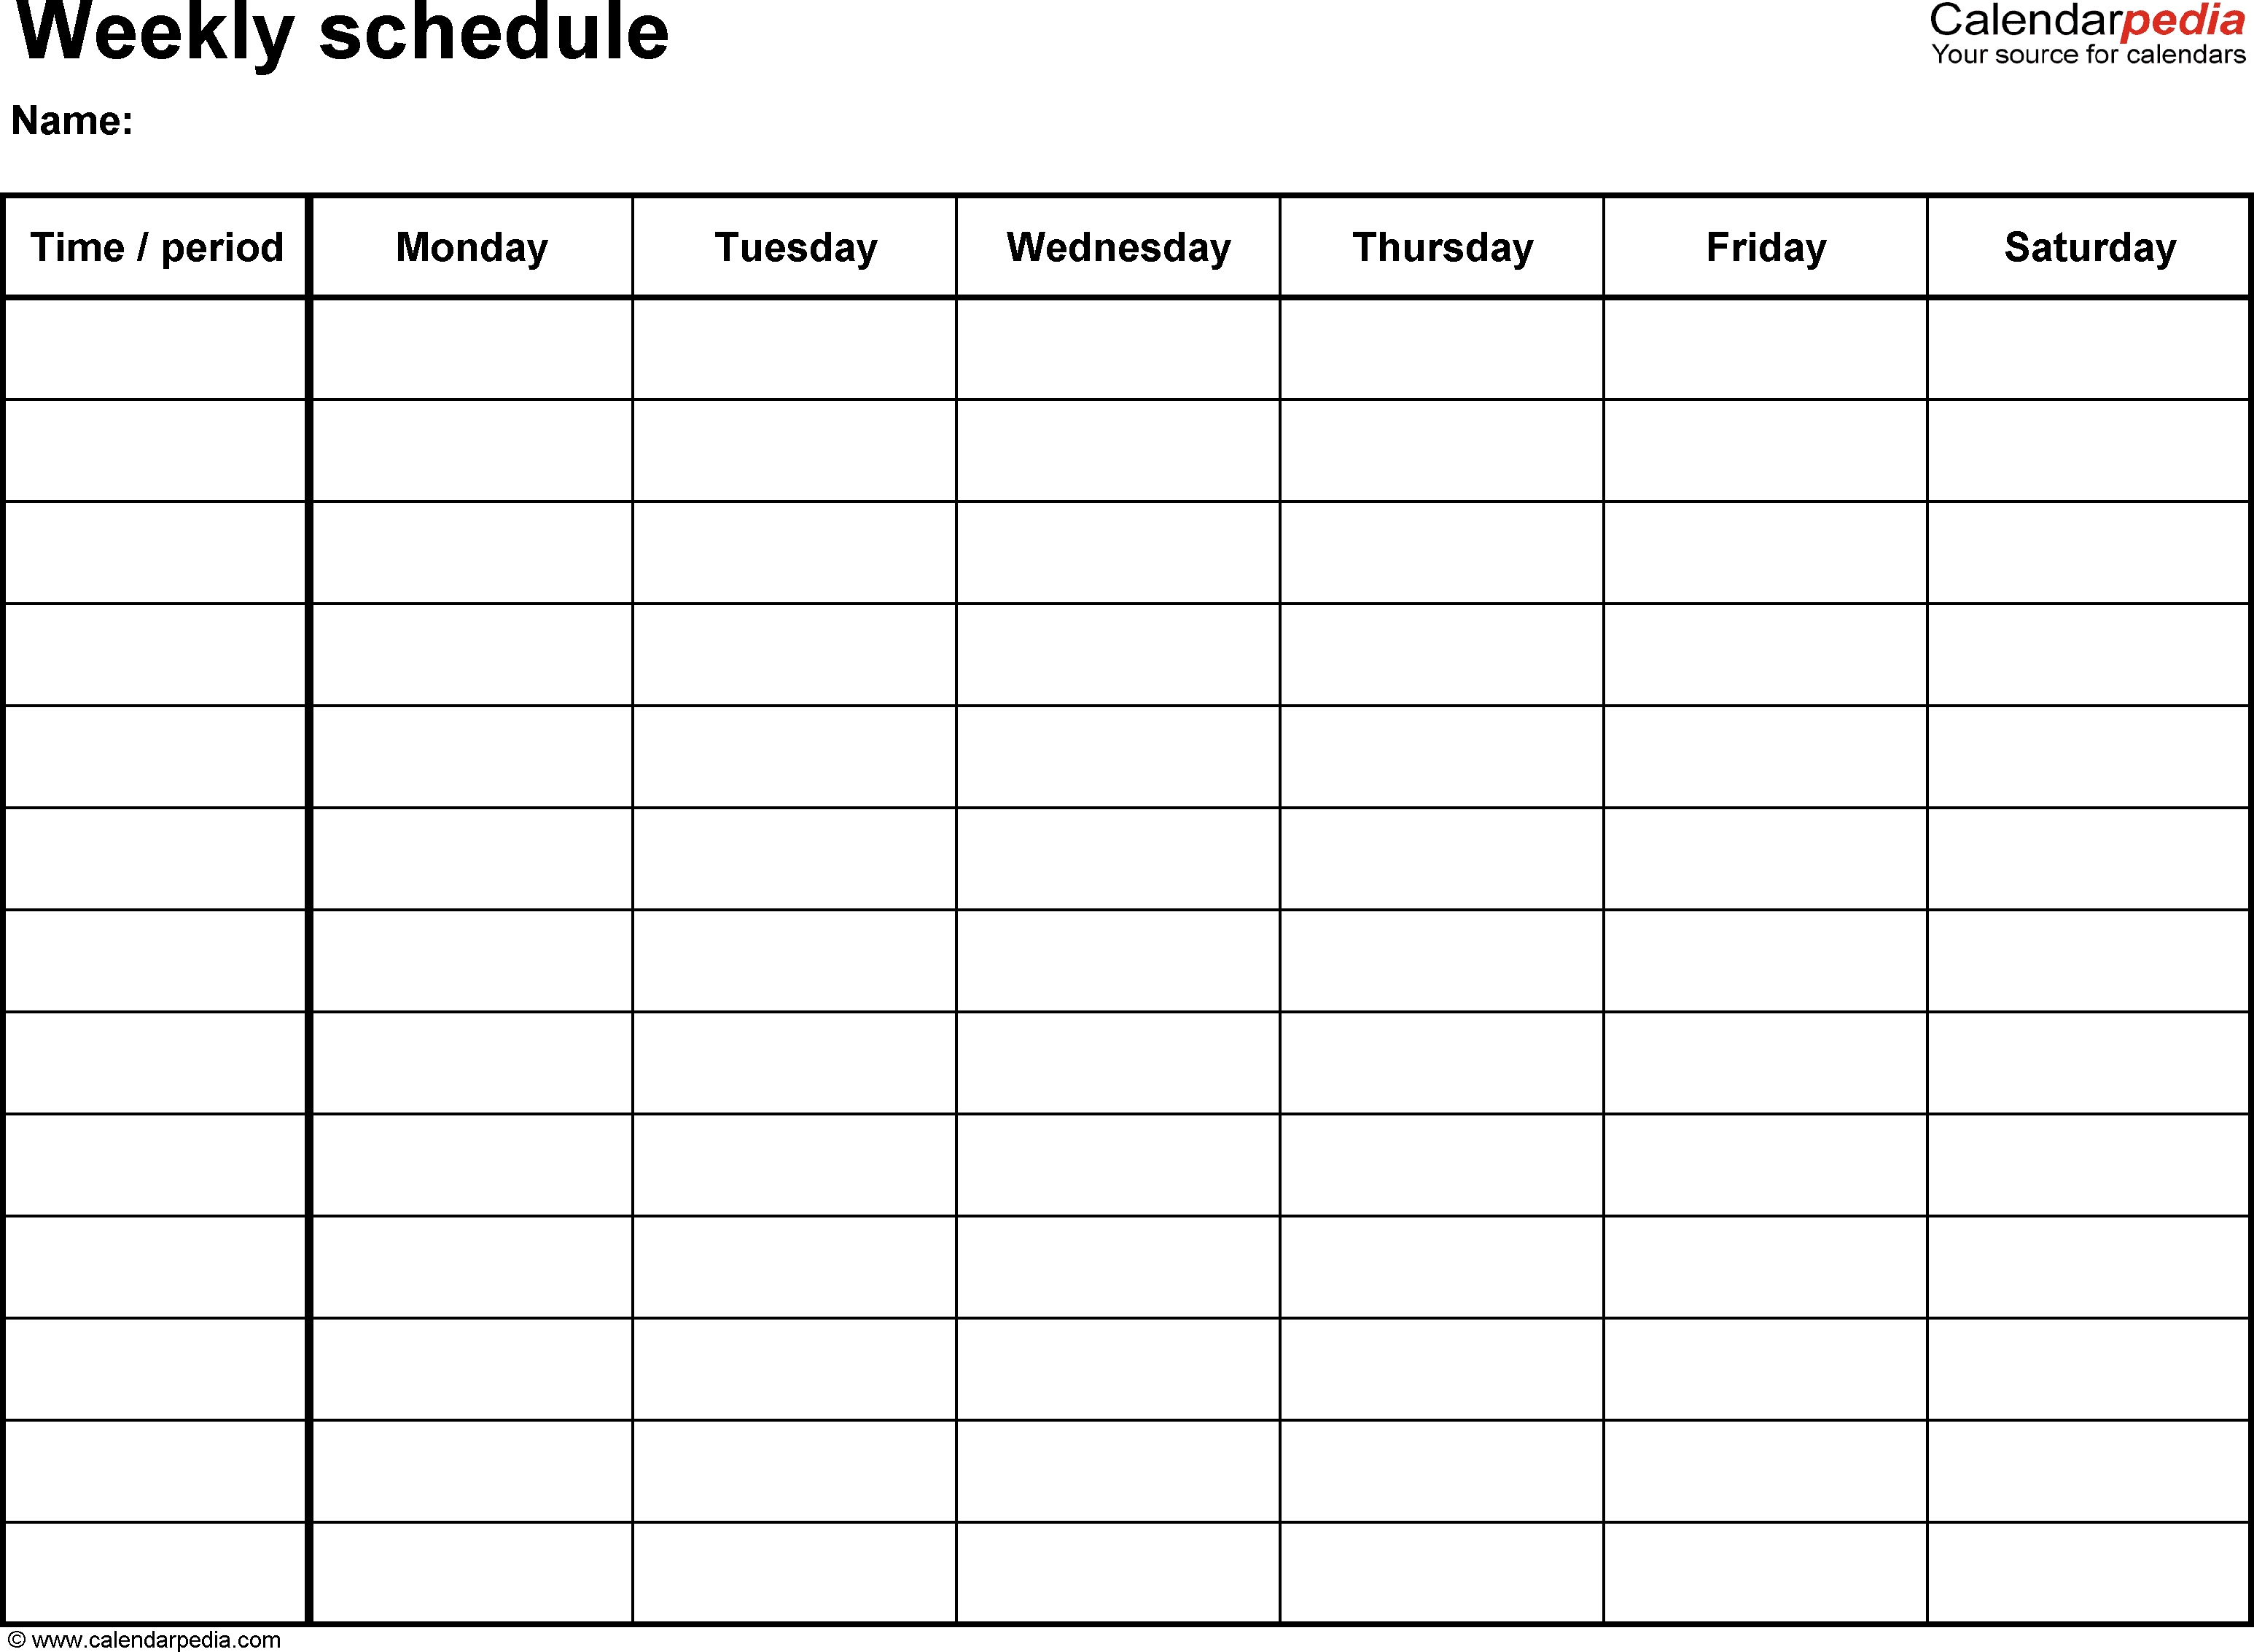 Free Weekly Schedule Templates For Excel - 18 Templates with Free Printable Template For Day Of The Week Schedule